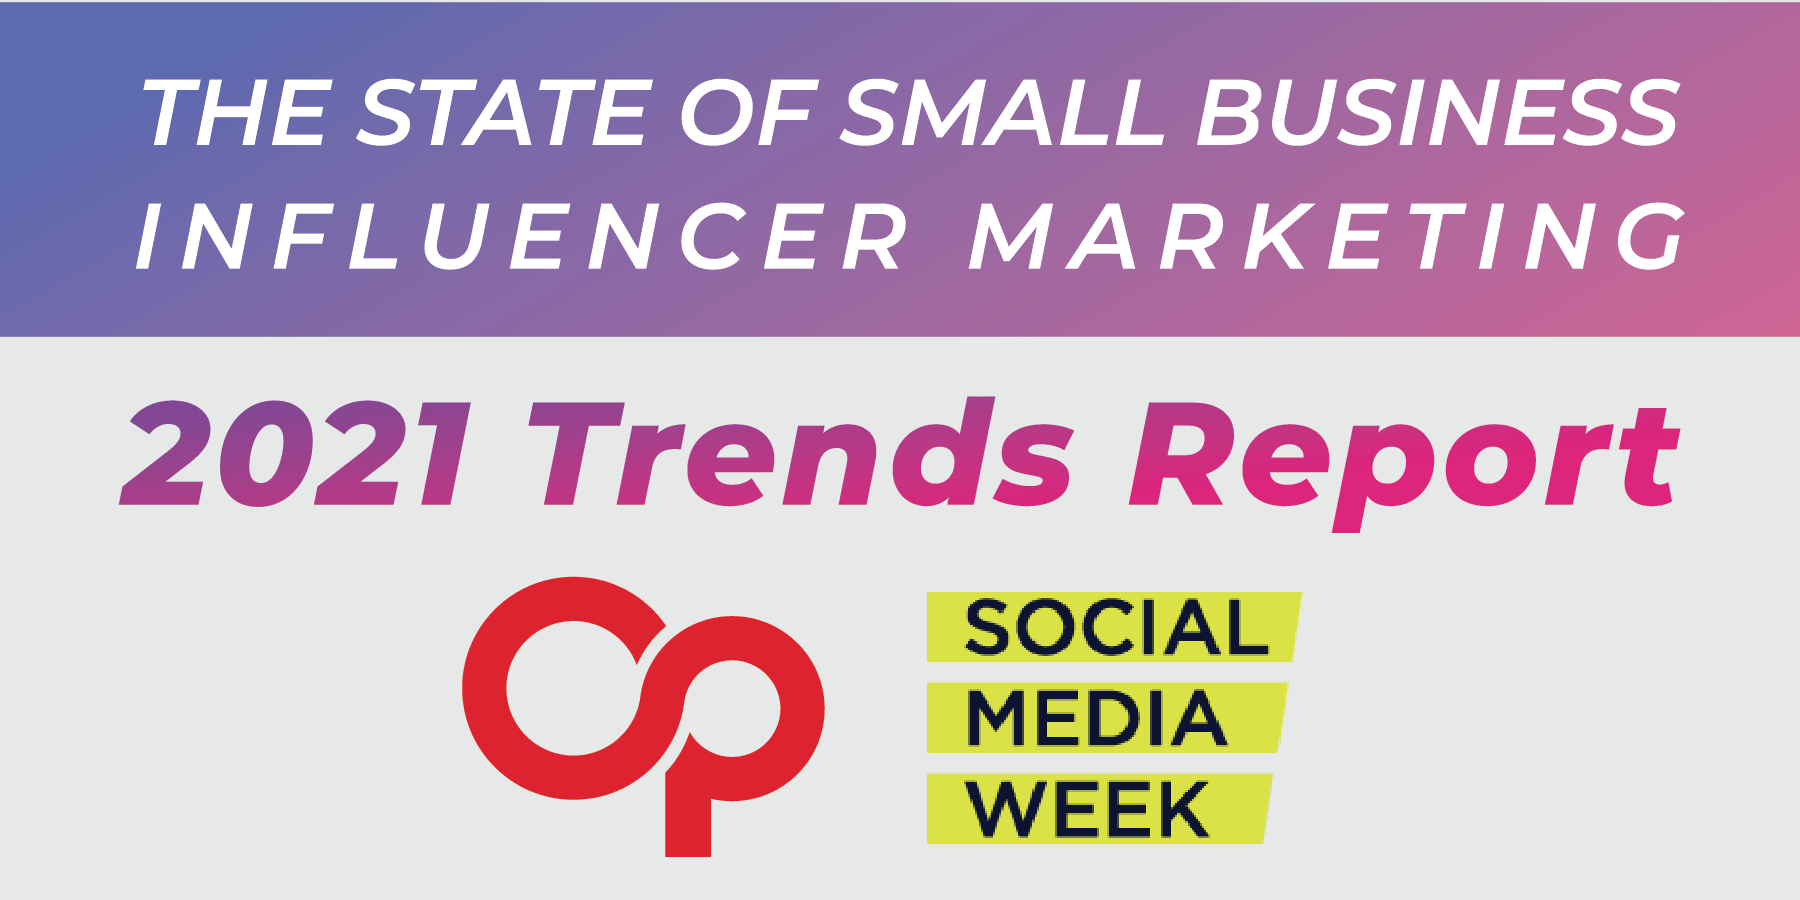 Trends Report: The State of Small Business Influencer Marketing